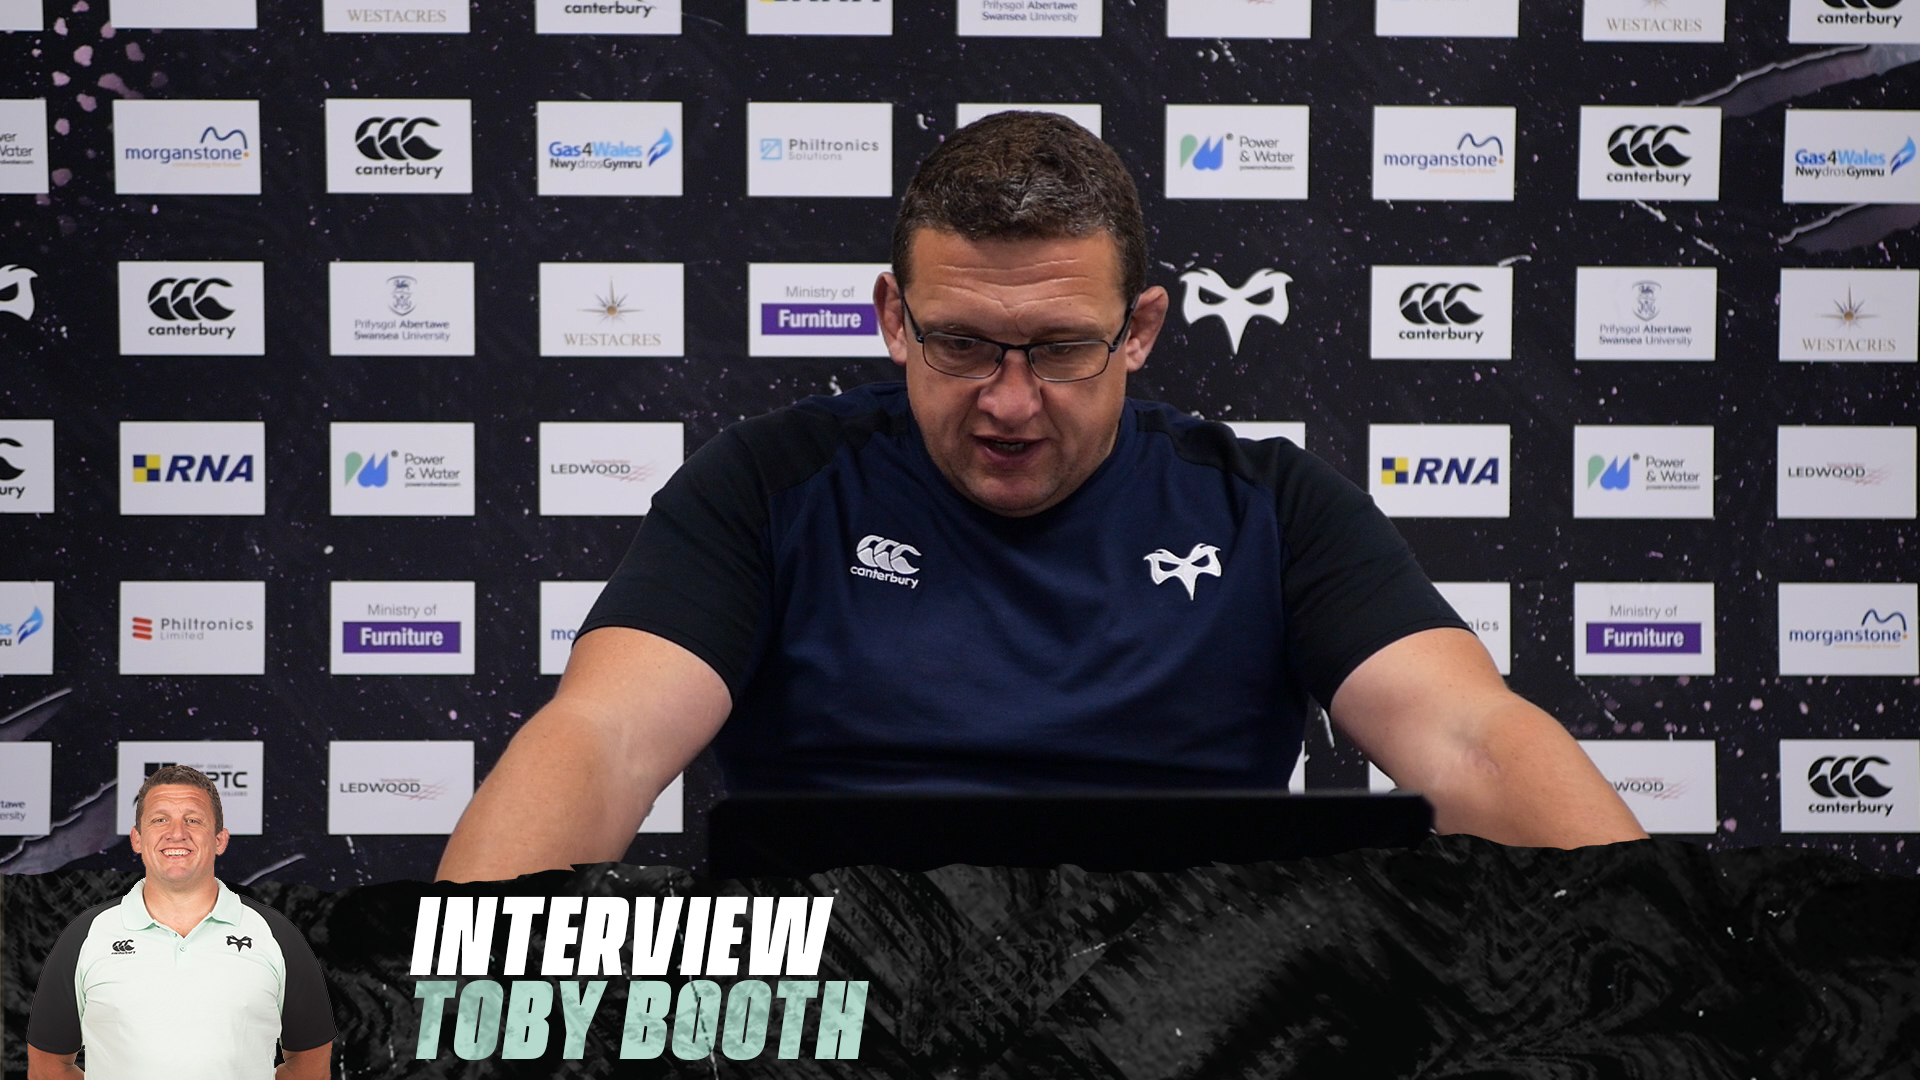 INTERVIEW: Toby Booth (20th November 2020)